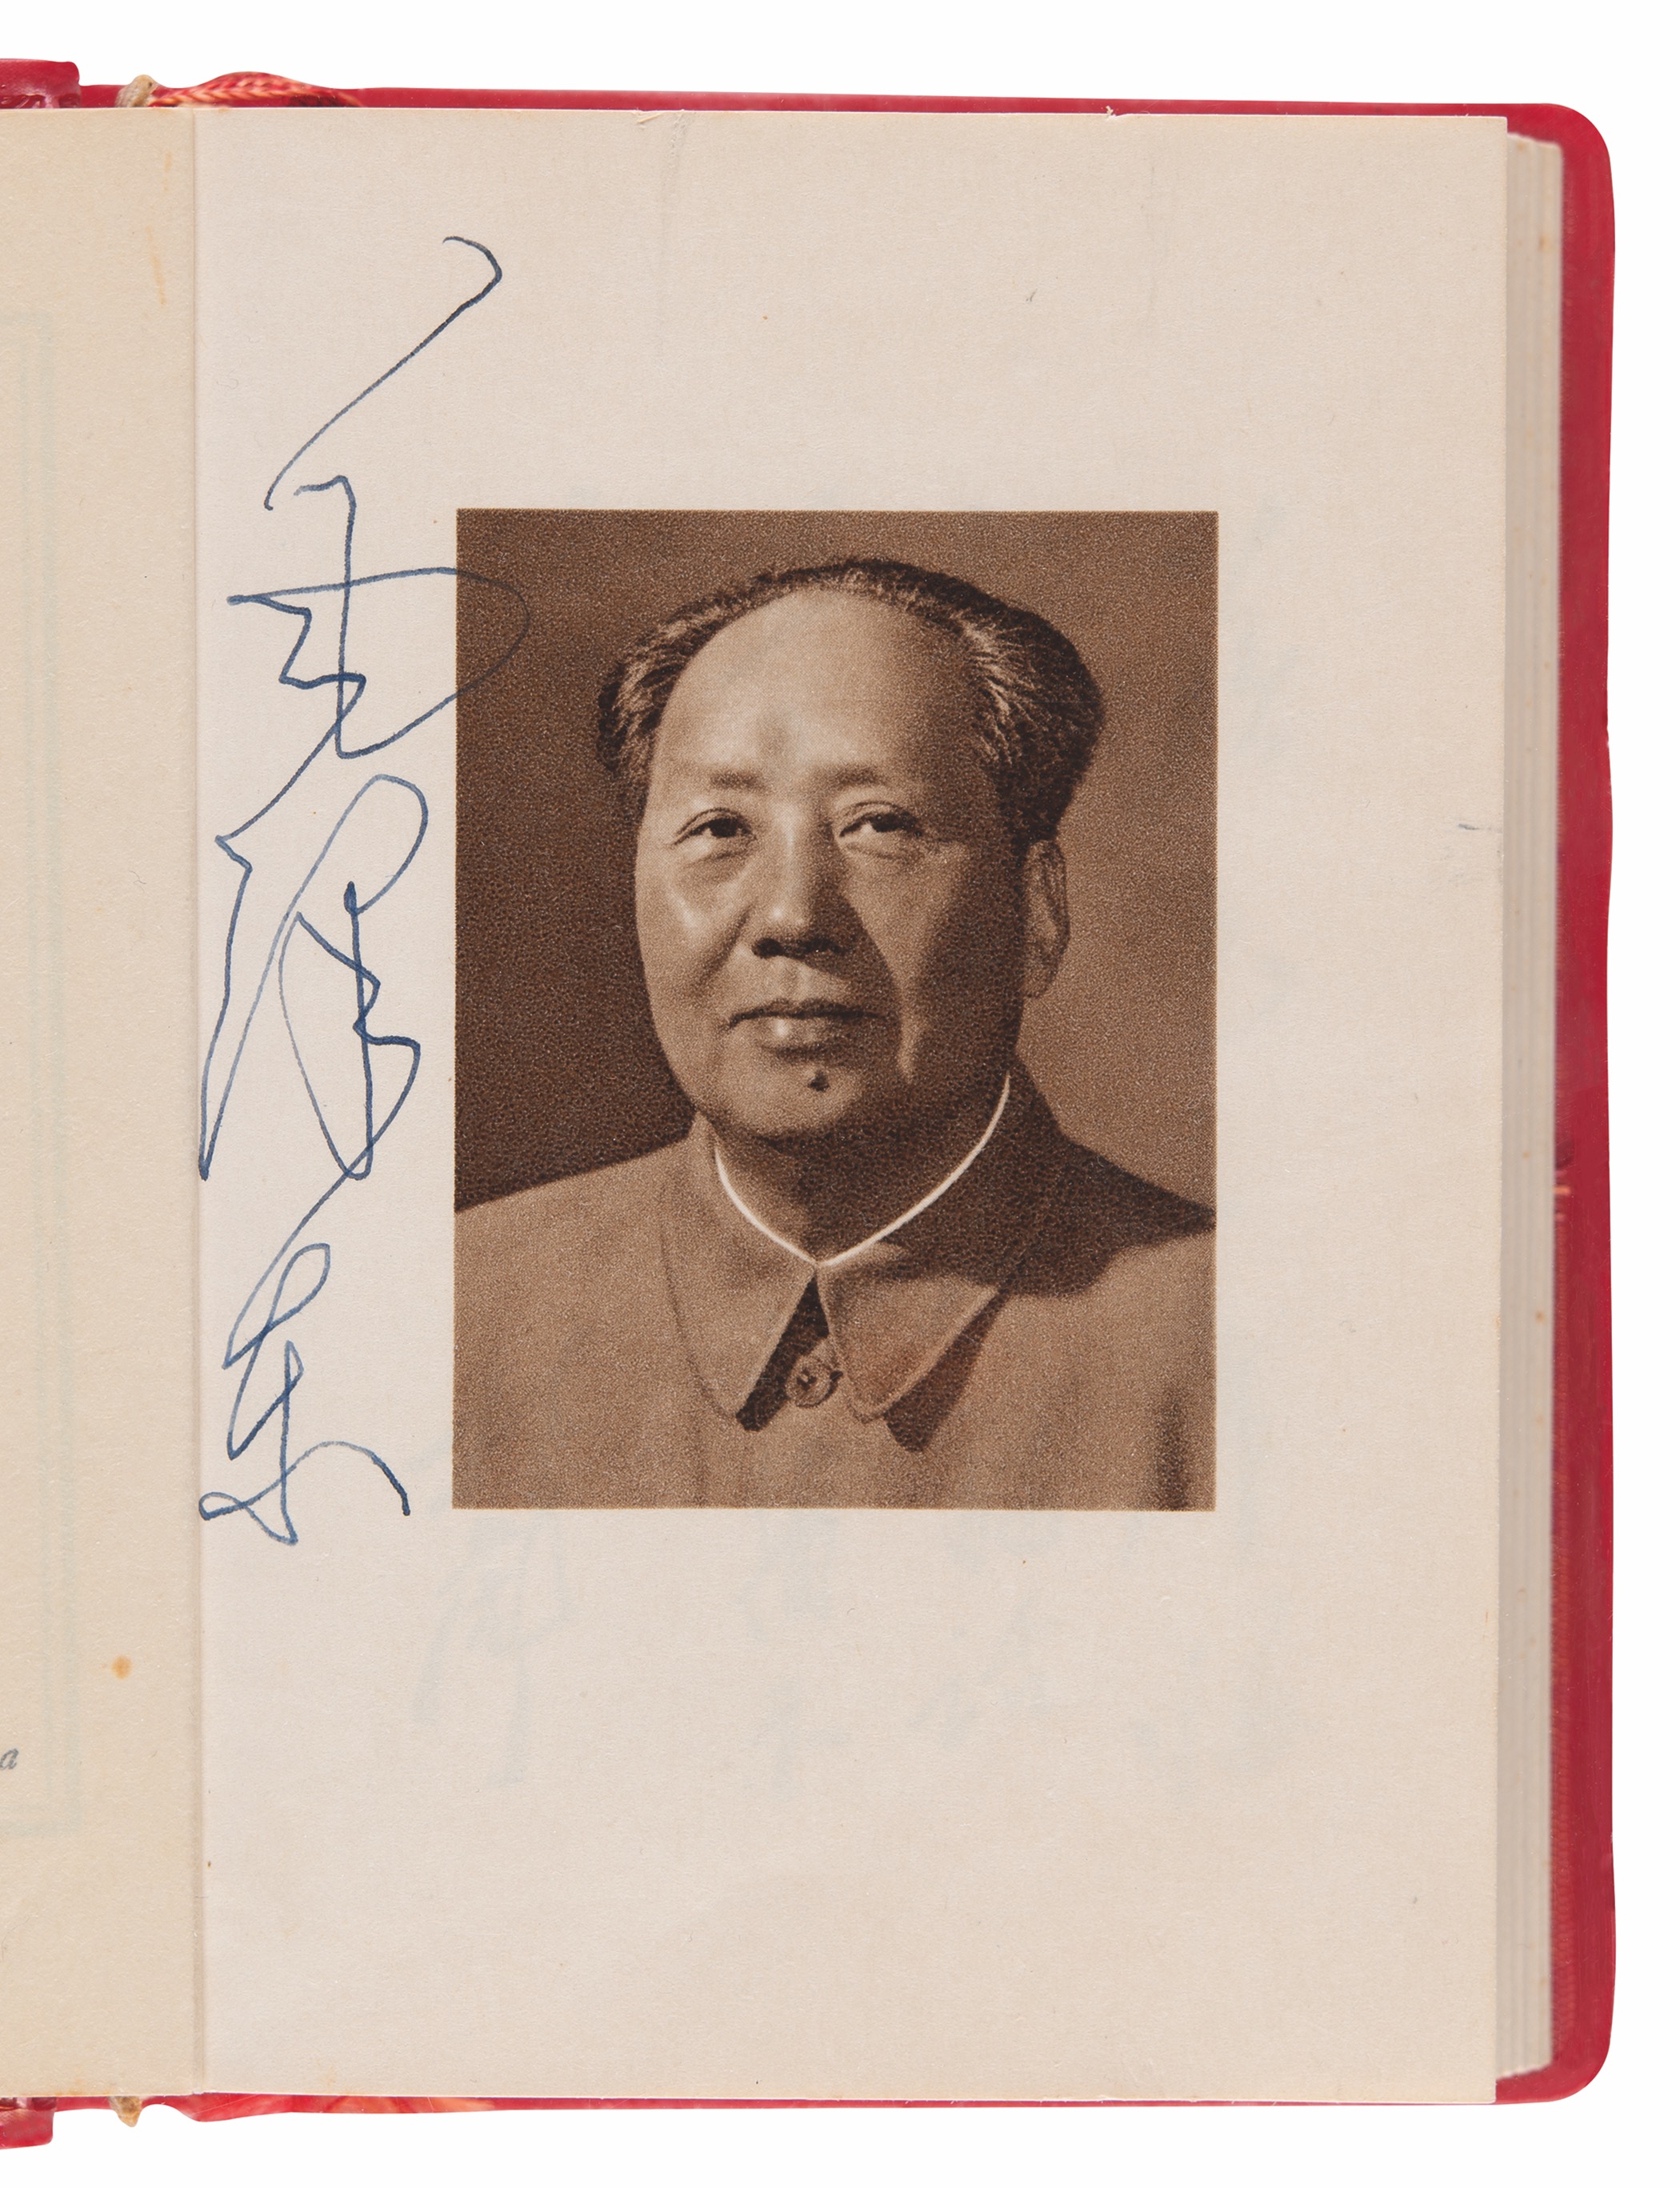 Lot #4023 Mao Zedong Historically Important Signed Book: Quotations from Chairman Mao (The Little Red Book) - Autographed for the Wife of Pakistan's Foreign Minister, with Photo Proof - Image 2